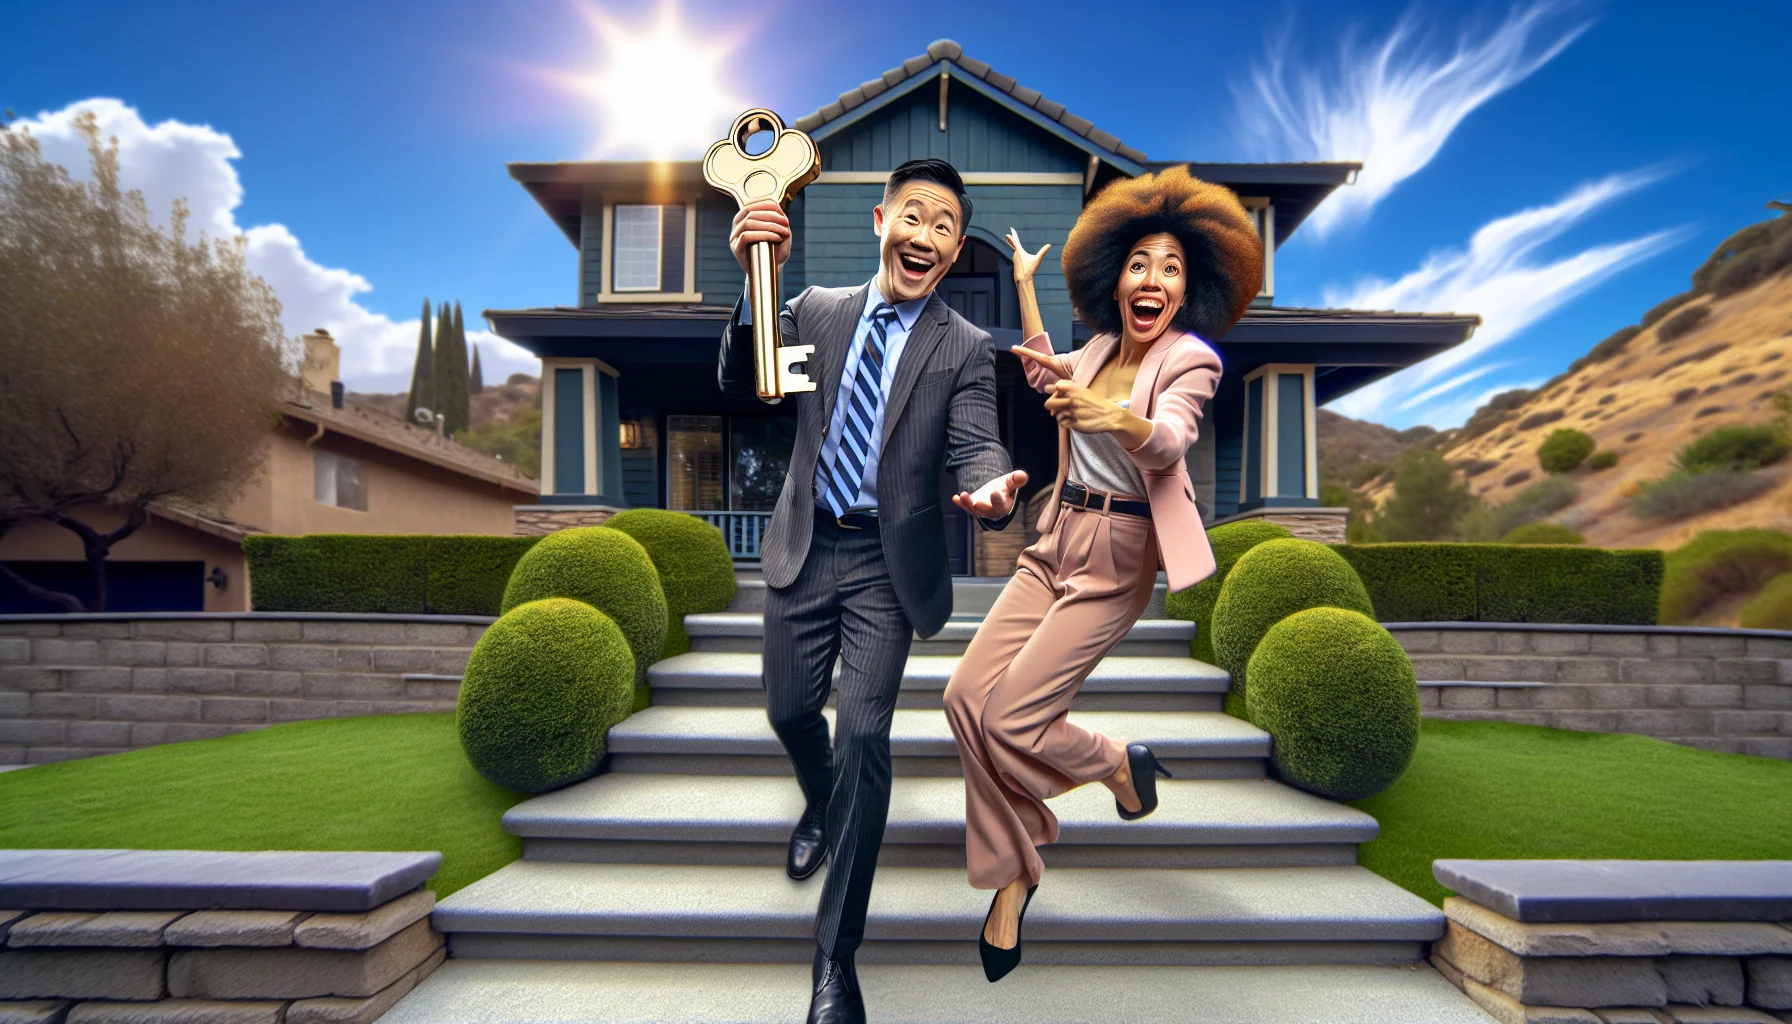 Generate a humorous, realistic scene emphasizing an ideal real estate scenario. Picture this: A beautifully maintained suburban home with a lush green lawn and manicured hedges under a bright blue sky. Walking up the smooth, stone steps of the house is a cheerful Asian man in his 40s, dressed as a real estate agent with an oversized, shining key in his hand. Just next to him, an excited Black woman in her 30s, beaming while pointing towards the house, symbolizing an eager buyer. Both seem to be in a jovial mood encapsulating the joy of a perfect real estate transaction.